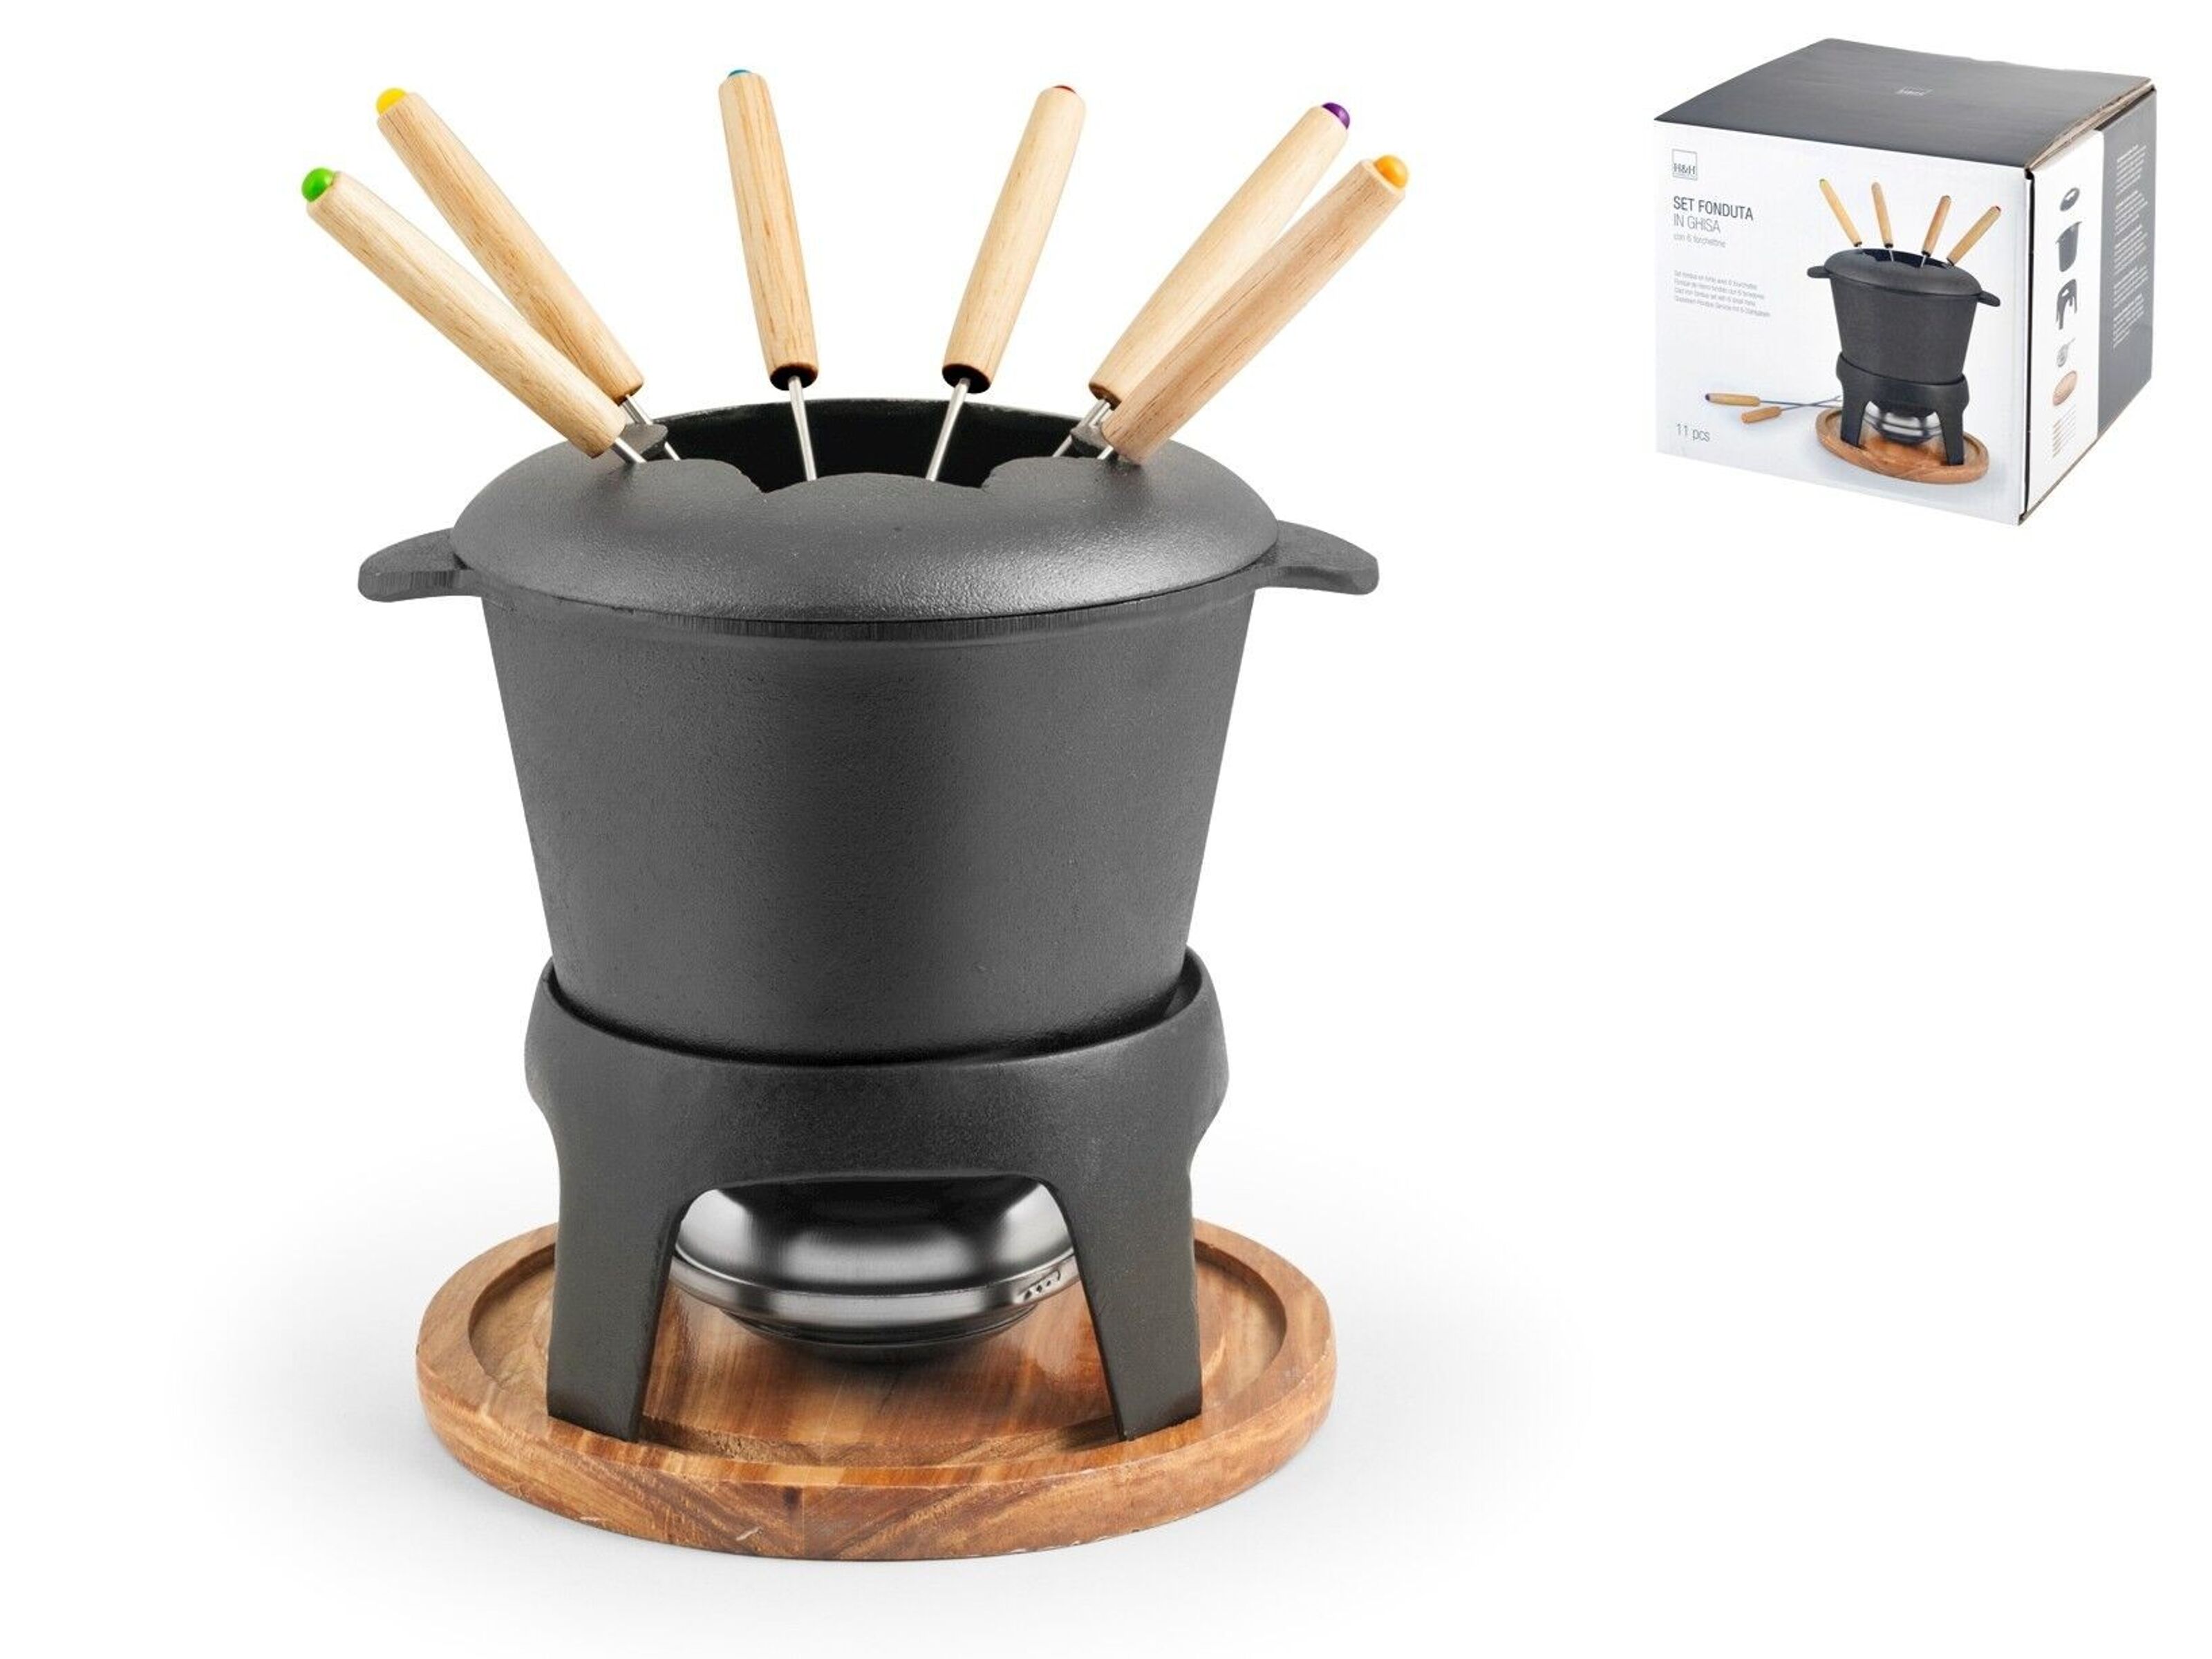 Buy wholesale 11-piece fondue set handle; Consisting fuel paste wooden base. of: 21x16x10 cast cm iron stainless cast with 1 wooden in 6 with h forks steel with saucepan iron stove; 1